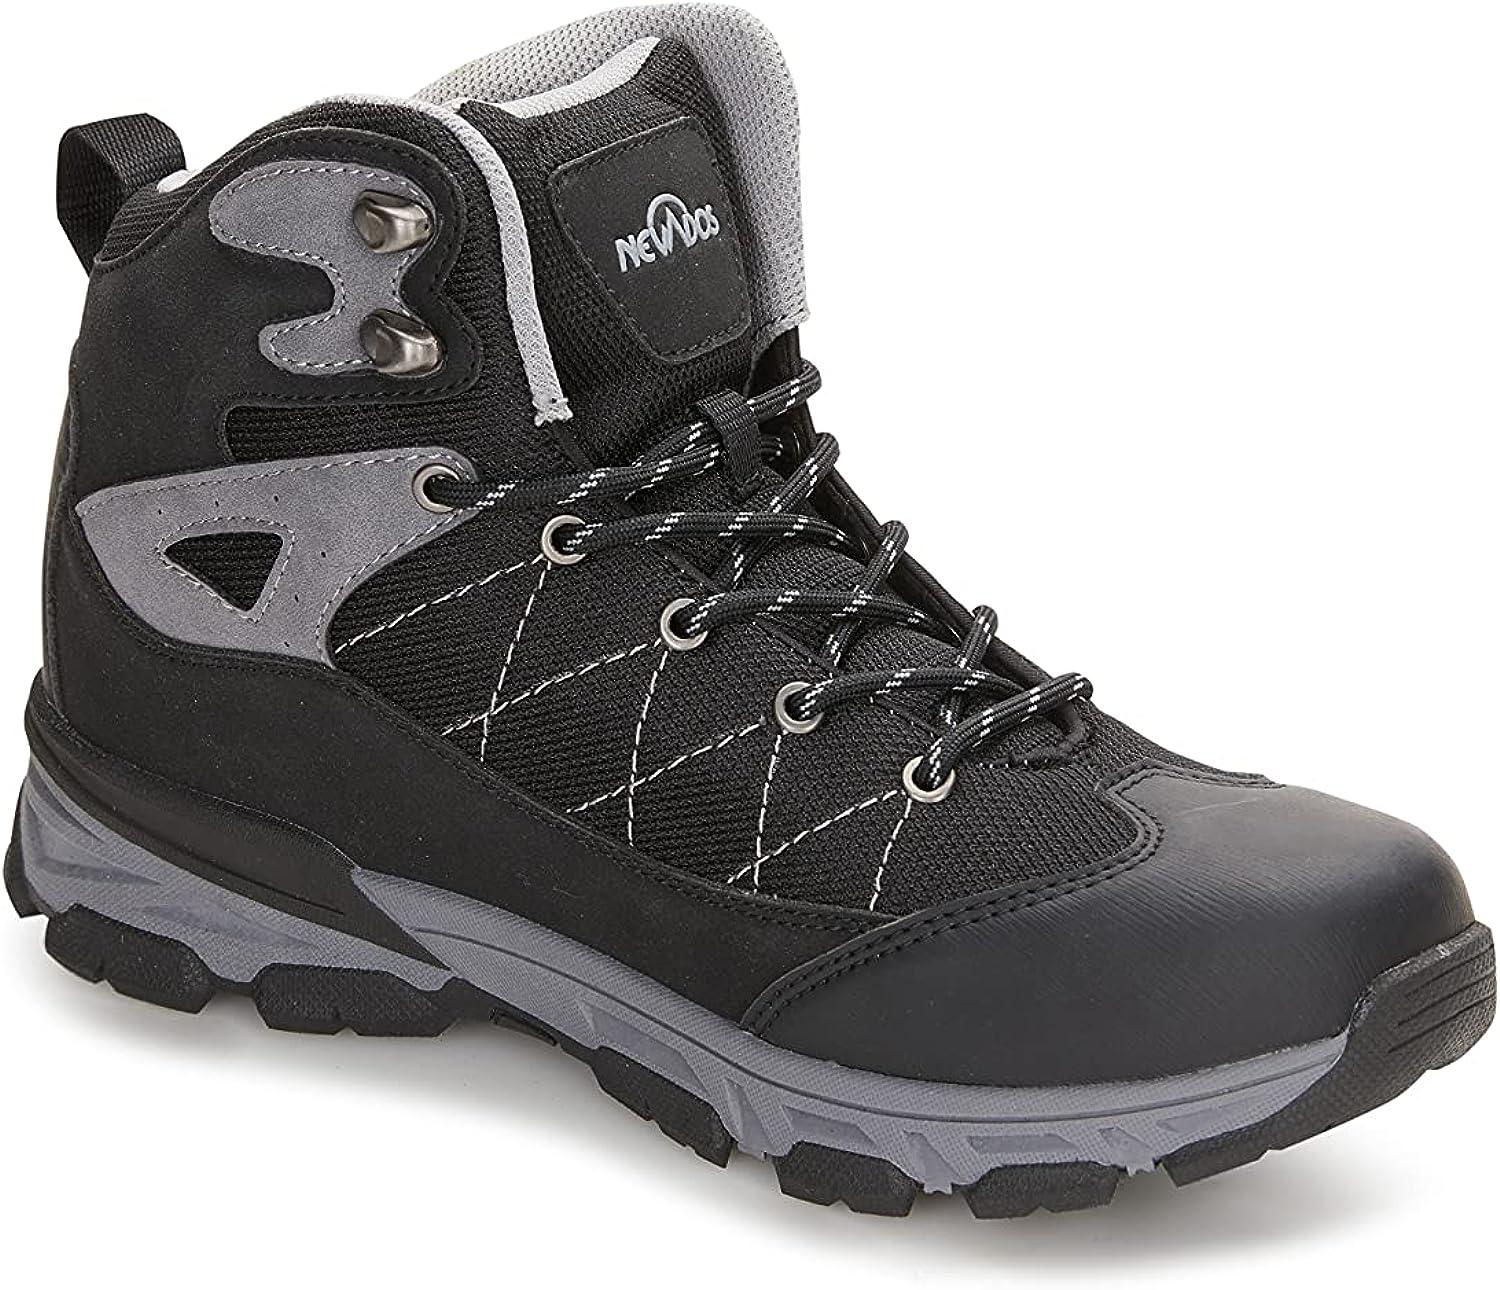 Nevados Dintore Mid Ankle Hiking Boots For Men  Waterproof, Multi-Terrain,  Supportive & Flexible Structure Traction Outsole Cushioned Insole 9.5 Black